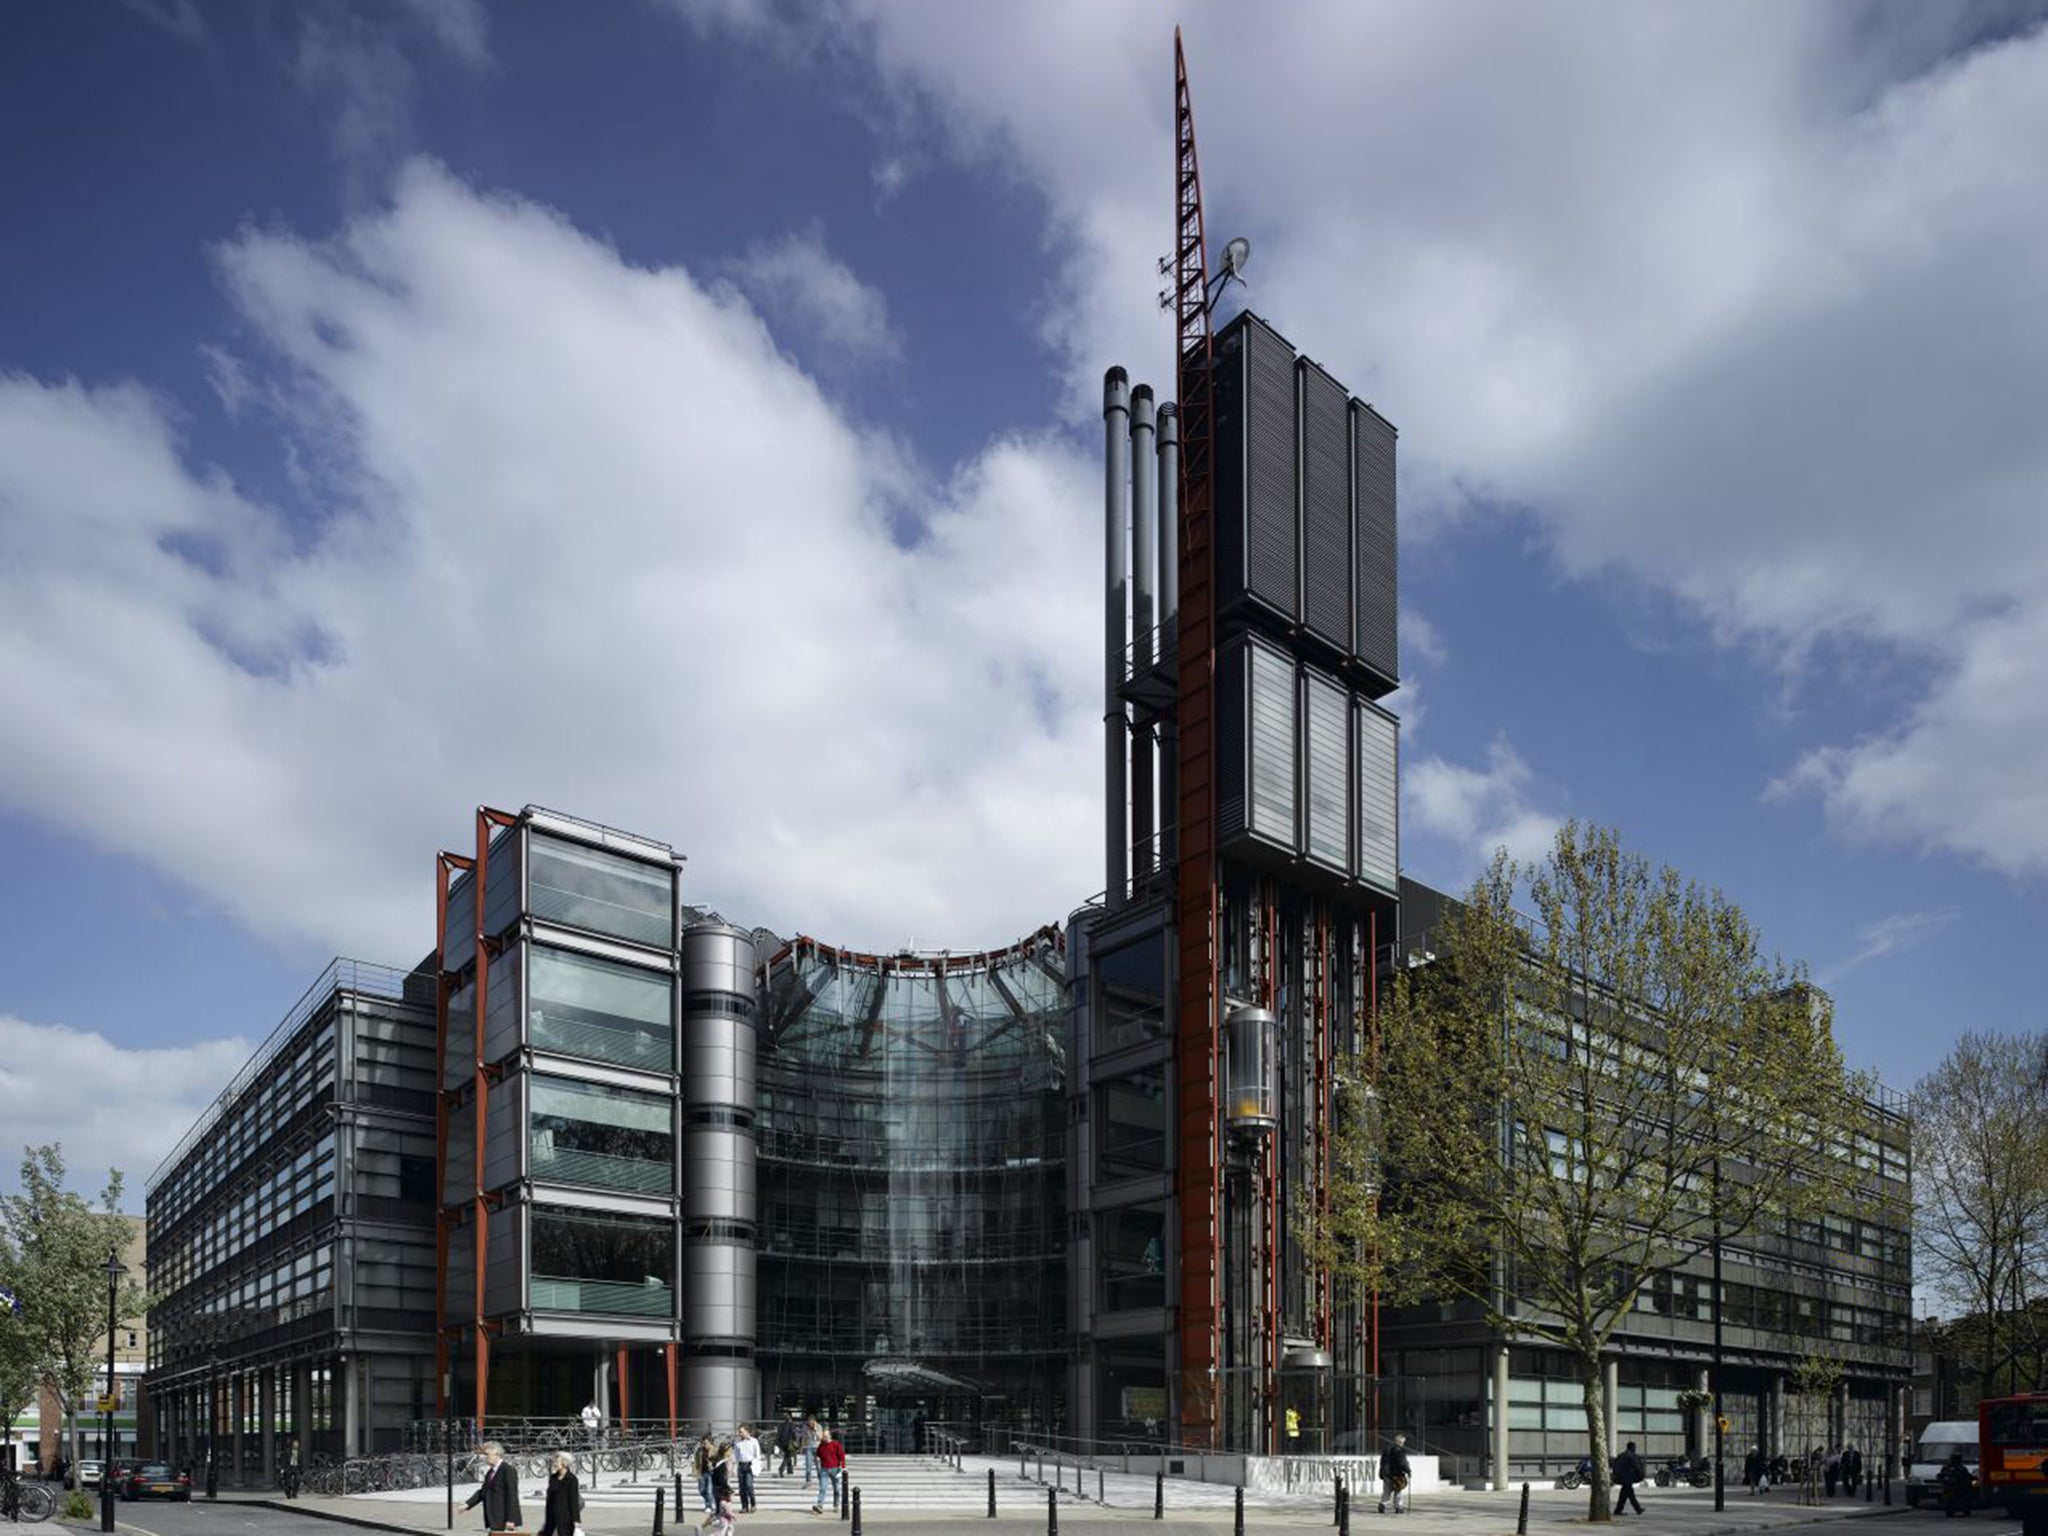 Channel 4’s headquarters was designed by Richard Rogers and is thought to be worth £85m